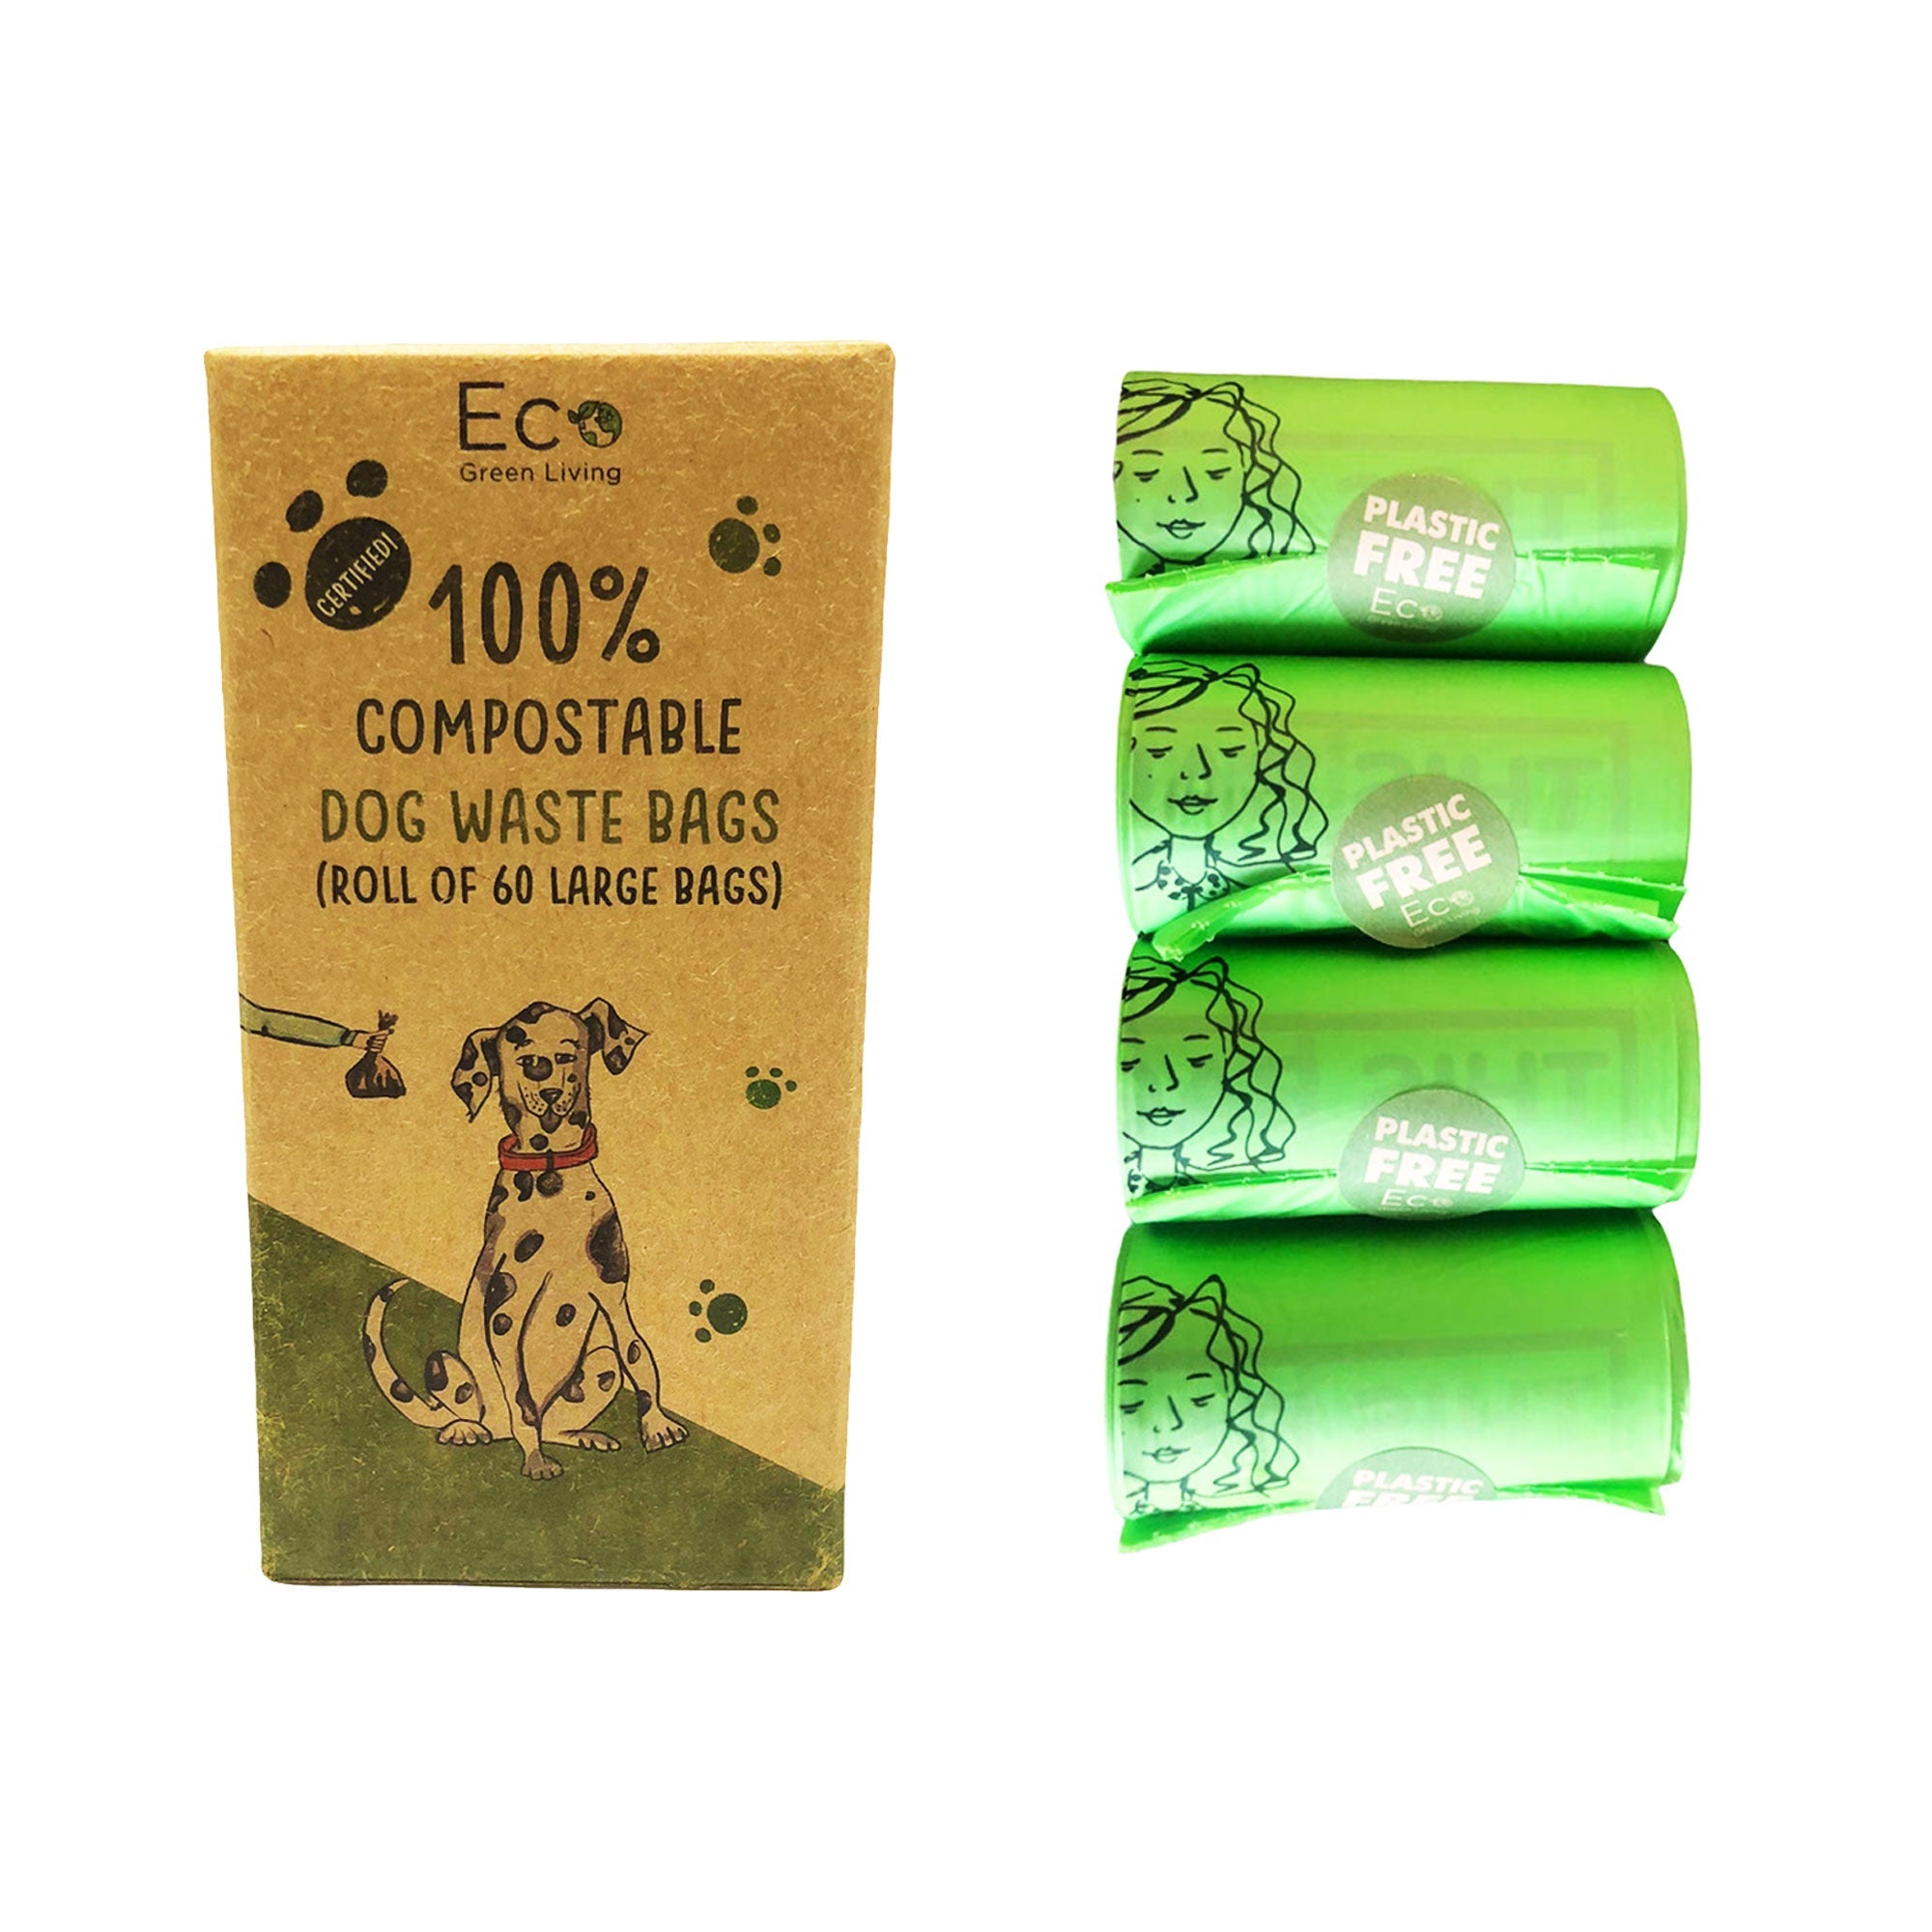 The 4 Best Compostable Dog Poop Bags According to Our Tests